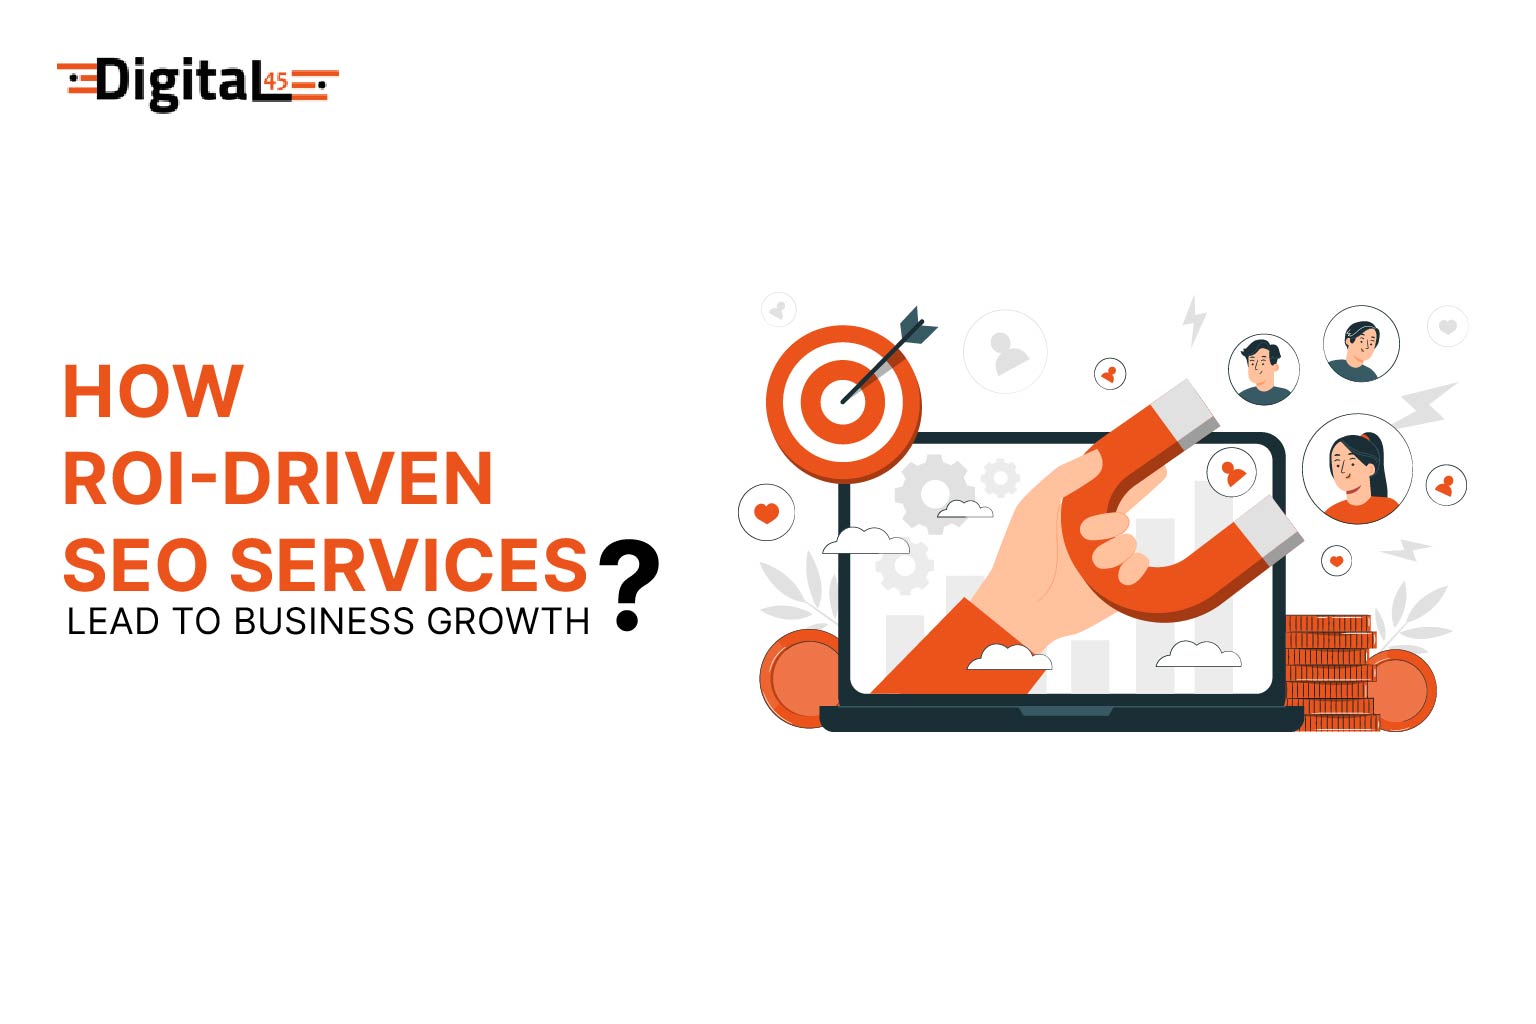 How ROI-Driven SEO Services Lead to Business Growth?